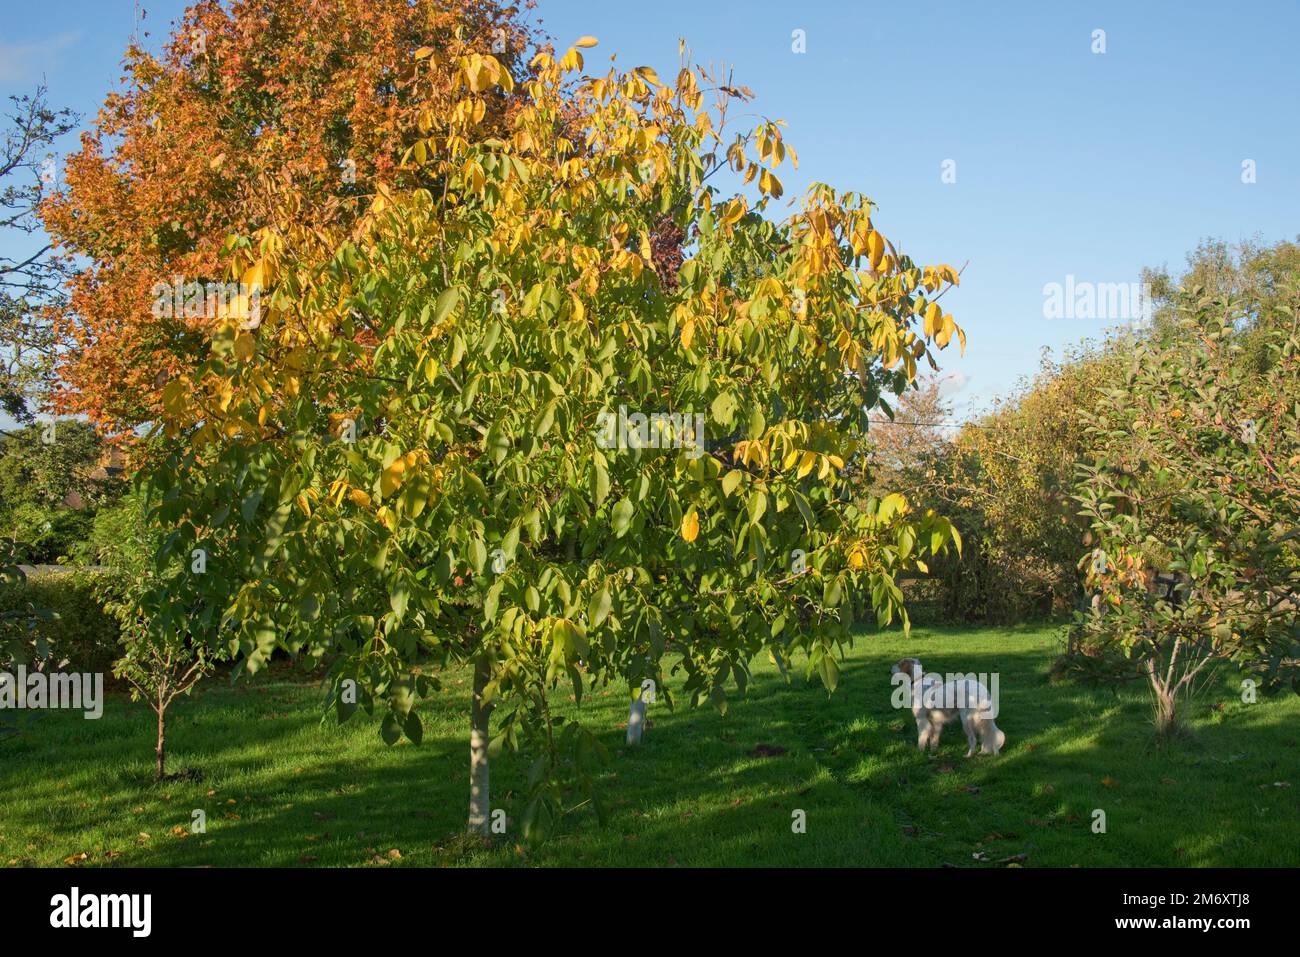 A garden orchard on a fine autumn day with a walnut tree and other fruit trees in bright colour against a blue sky, Berkshire, October Stock Photo